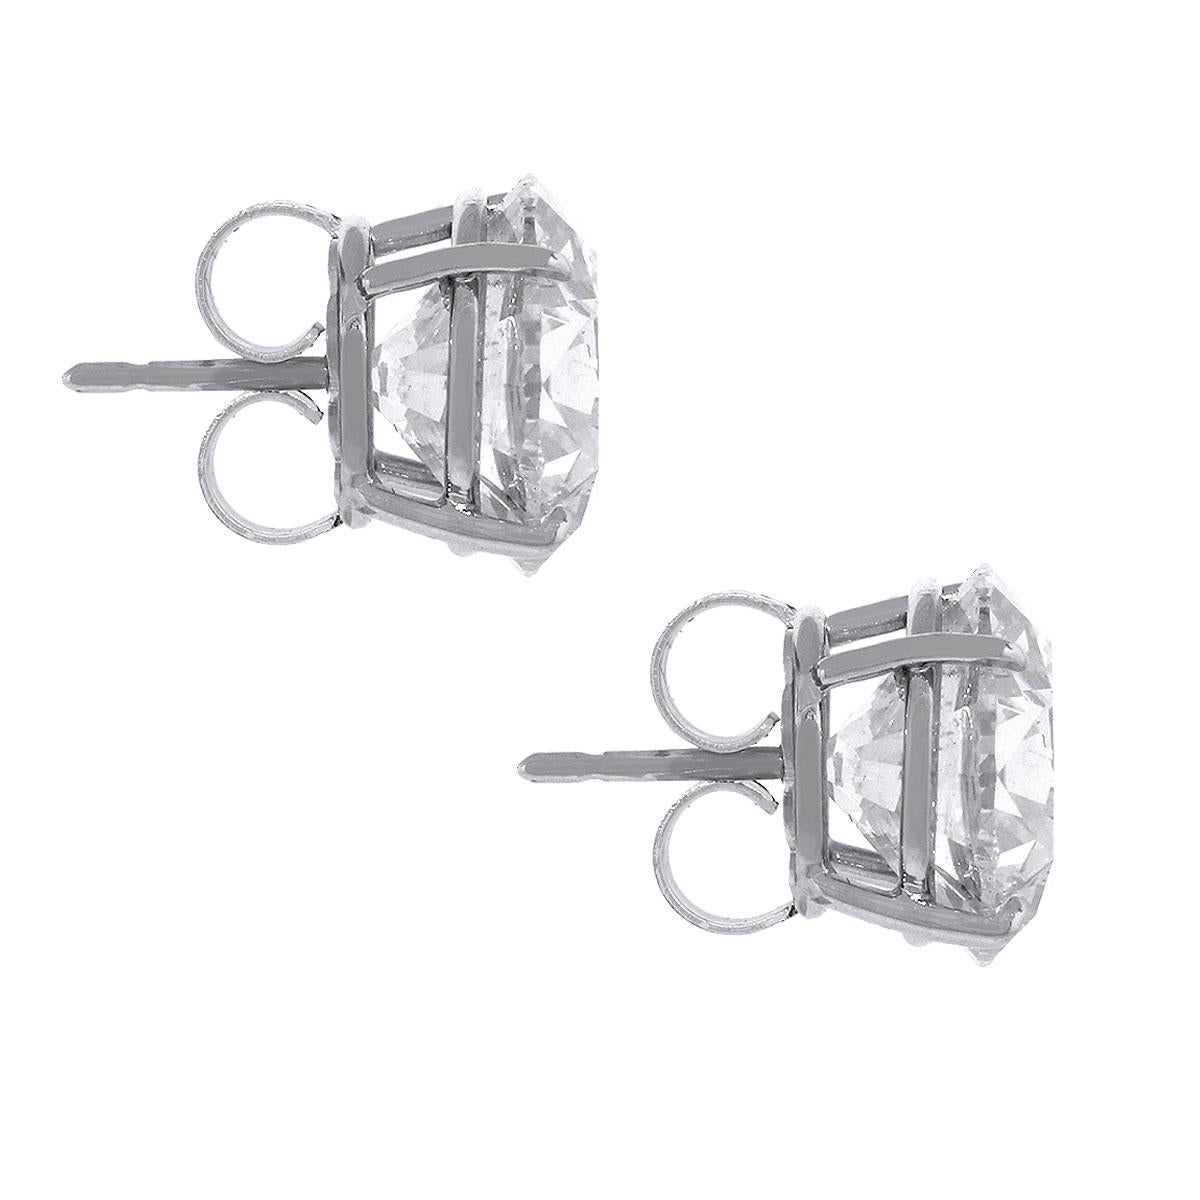 Material: 14k White Gold
Diamond Details: Approximately 15.17ctw of round brilliant diamonds. Diamonds are I in color, SI3 in clarity
Measurements: 0.50″ x 0.80″ x 0.50
Earrings Backs: Post Friction
Total Weight: 6.4g (4dwt)
SKU: A30311854